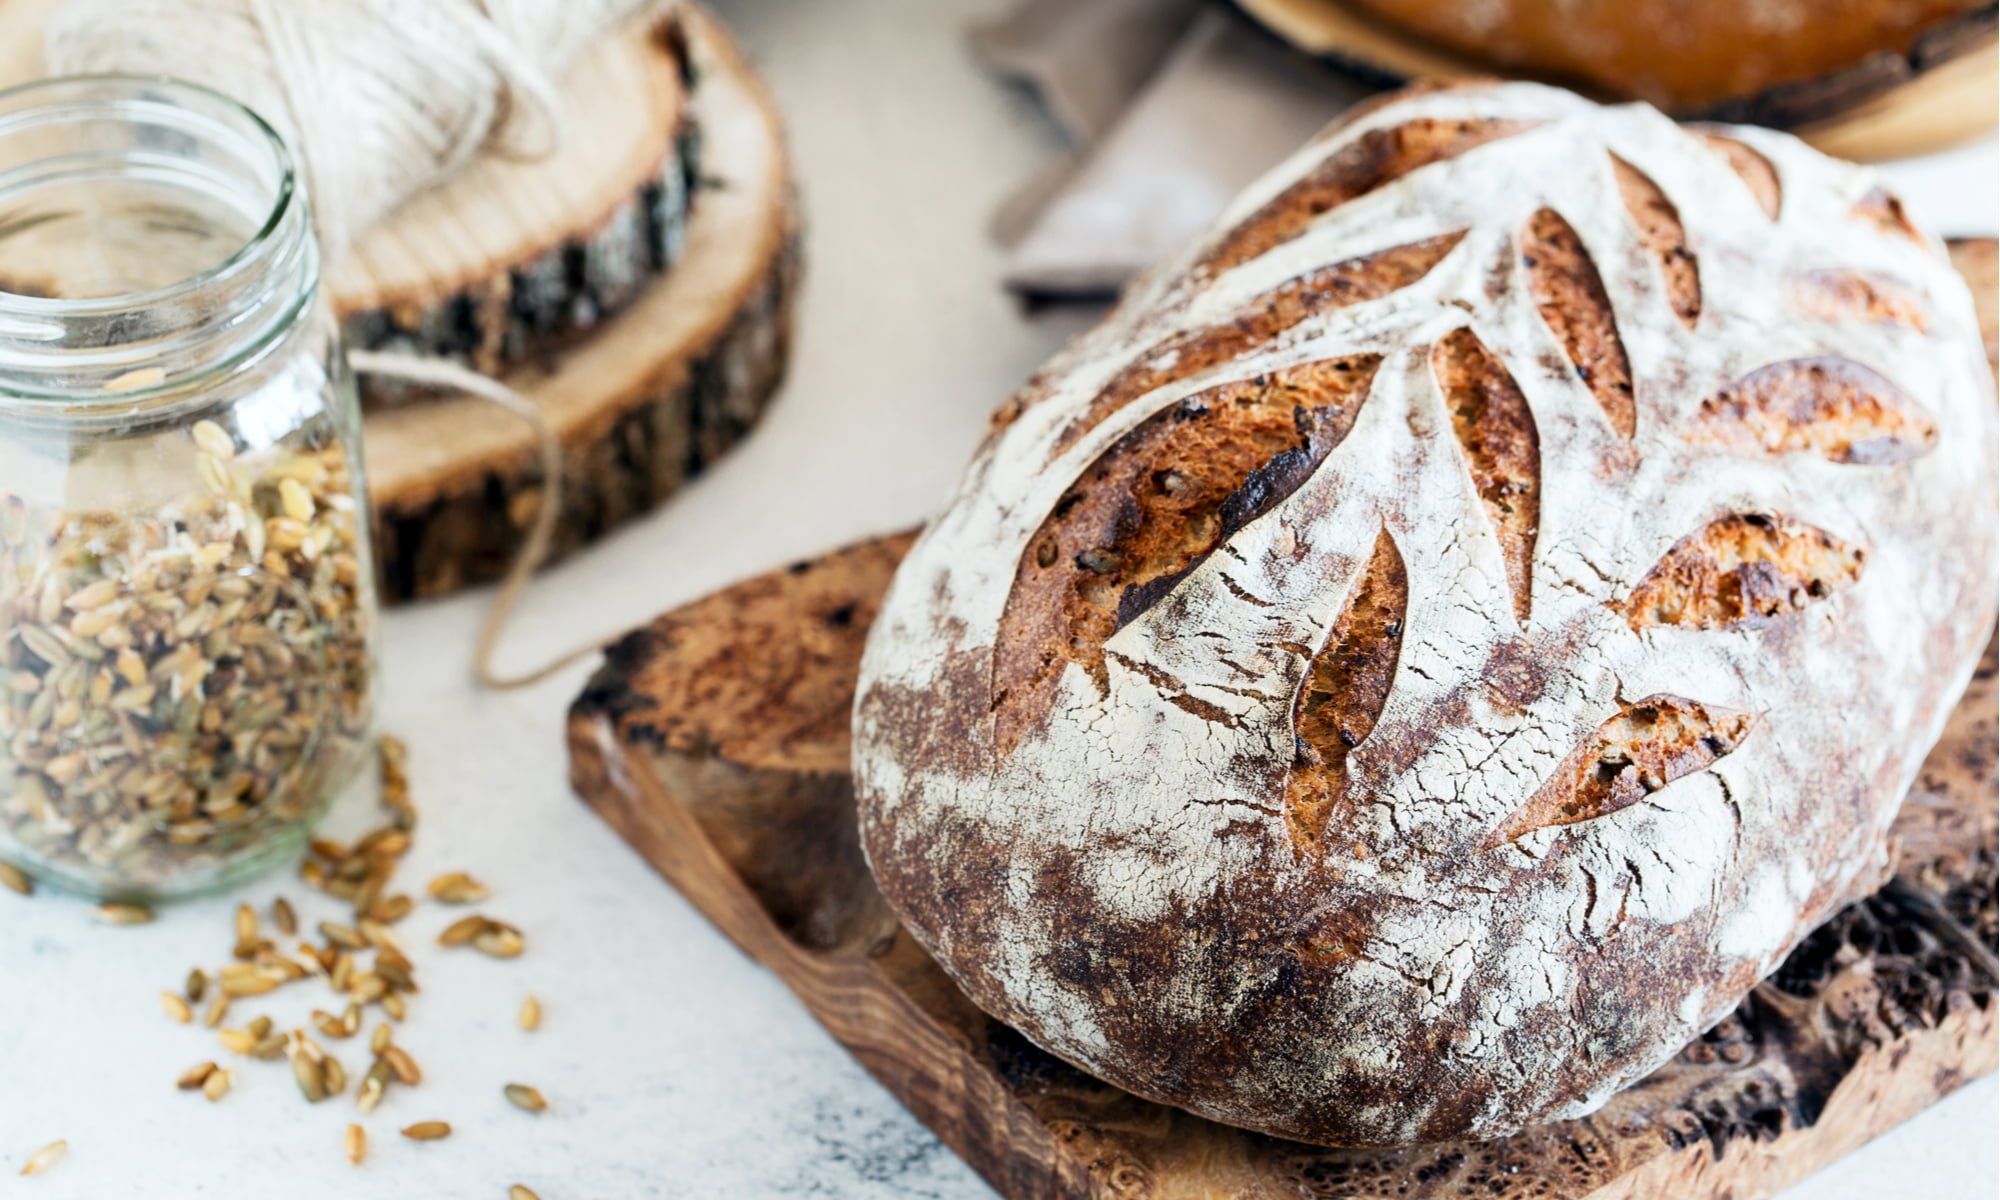 Sprouted Grain Breads: Are They Healthier?